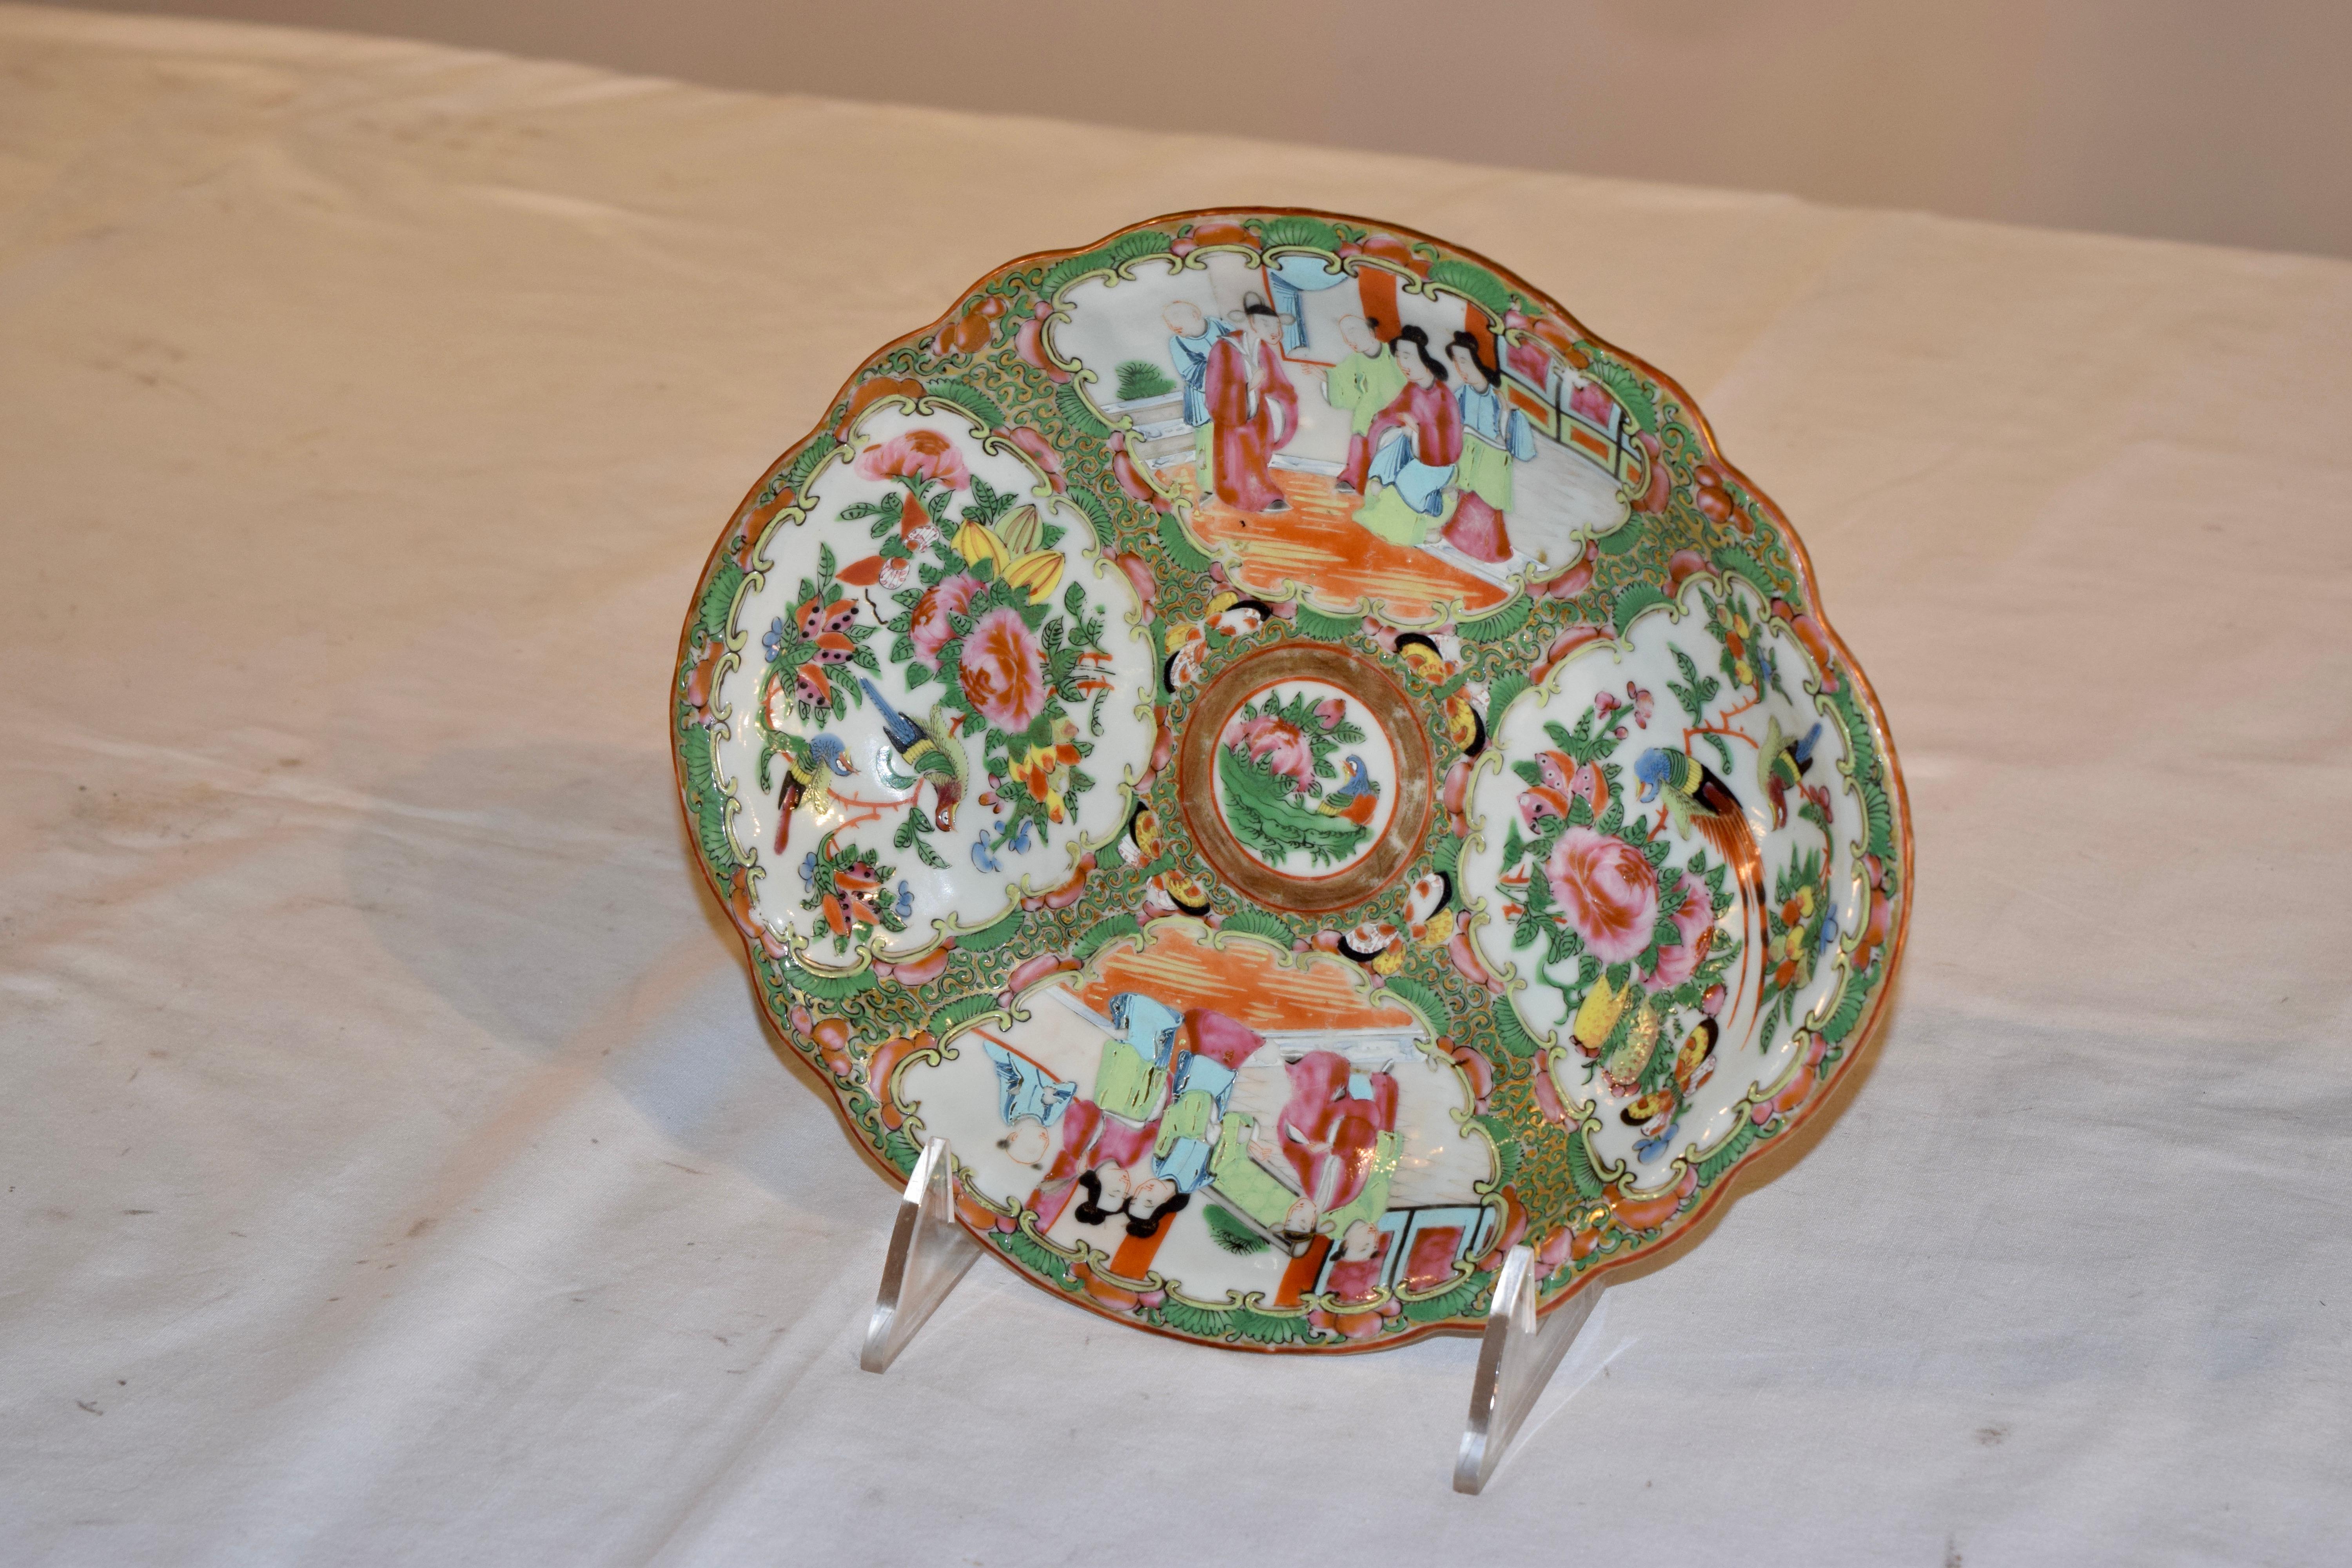 19th century shaped dish in the highly collectible 